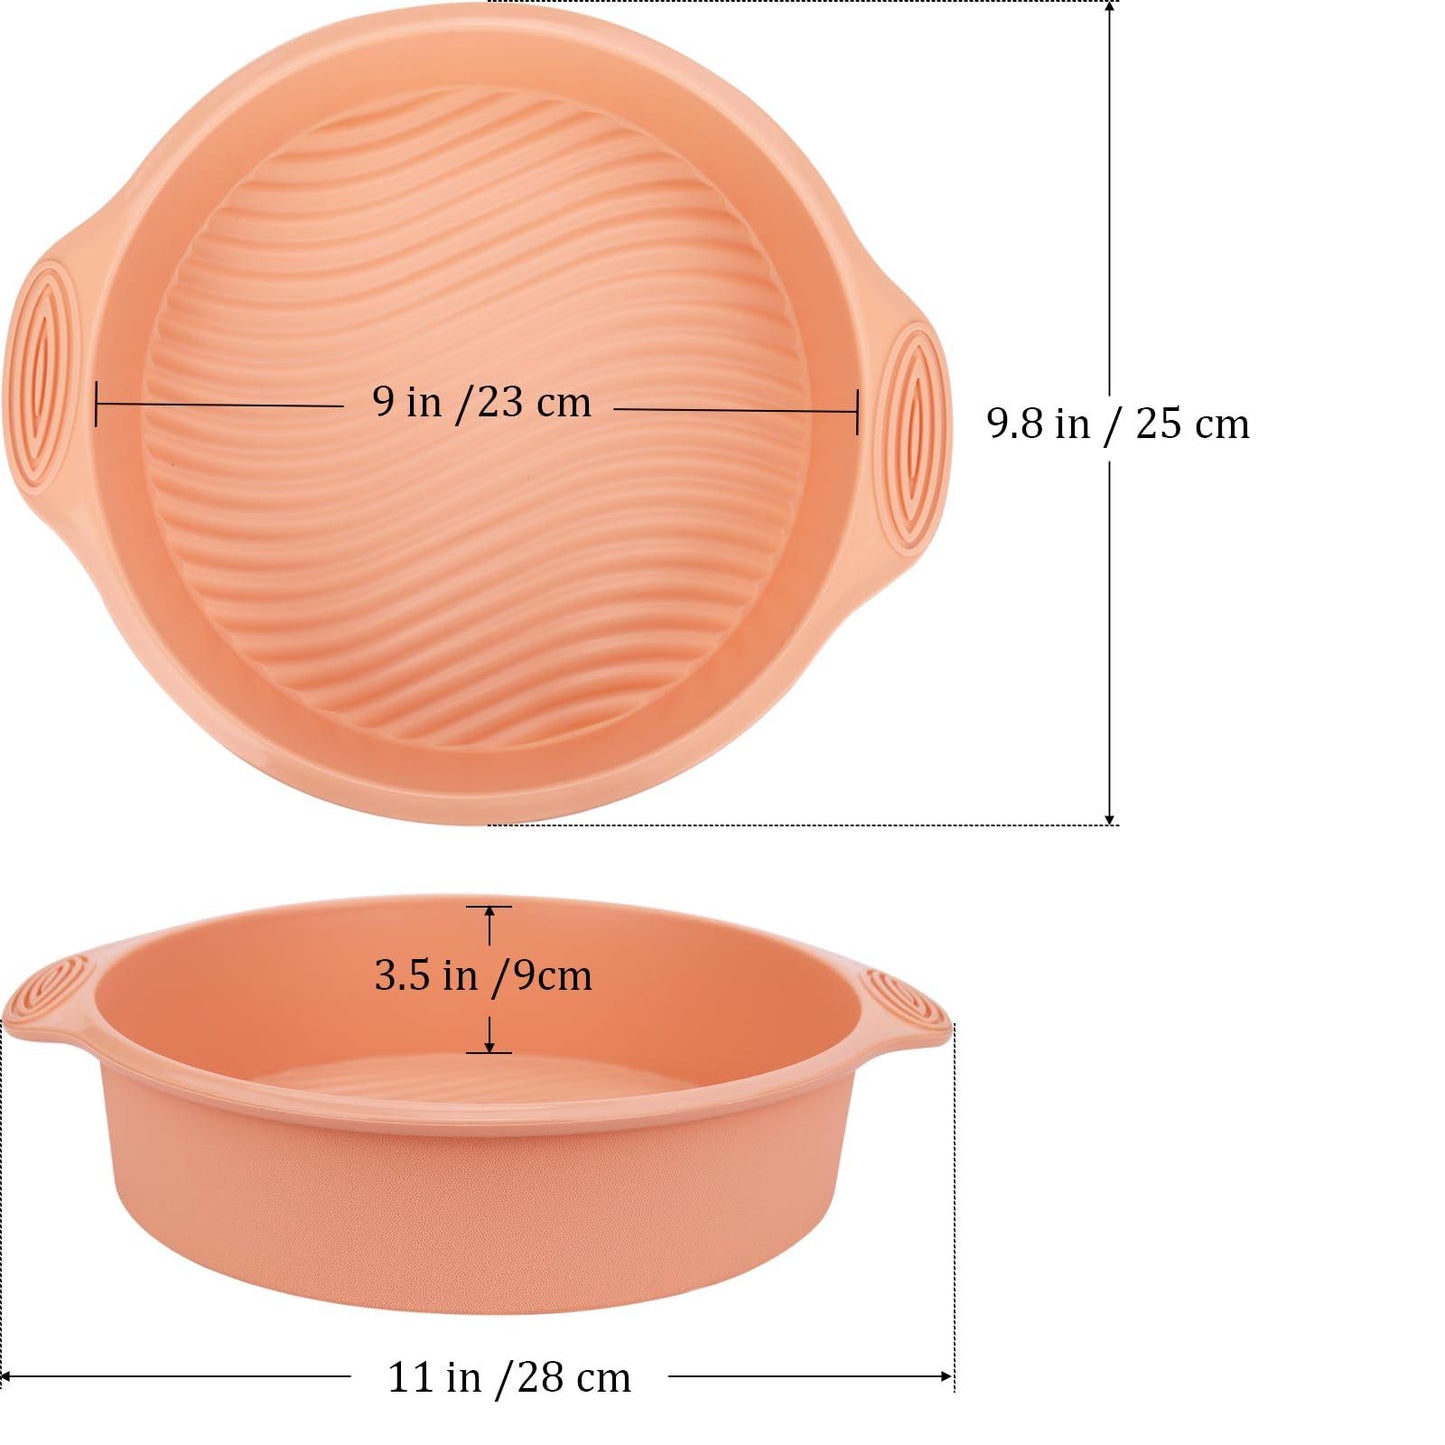 Baocuan 9 inch Silicone Round Cake Pan - Non stick bread pan for baking cake pizza bread and More Food Grade & BPA Free Set of 3 - CookCave